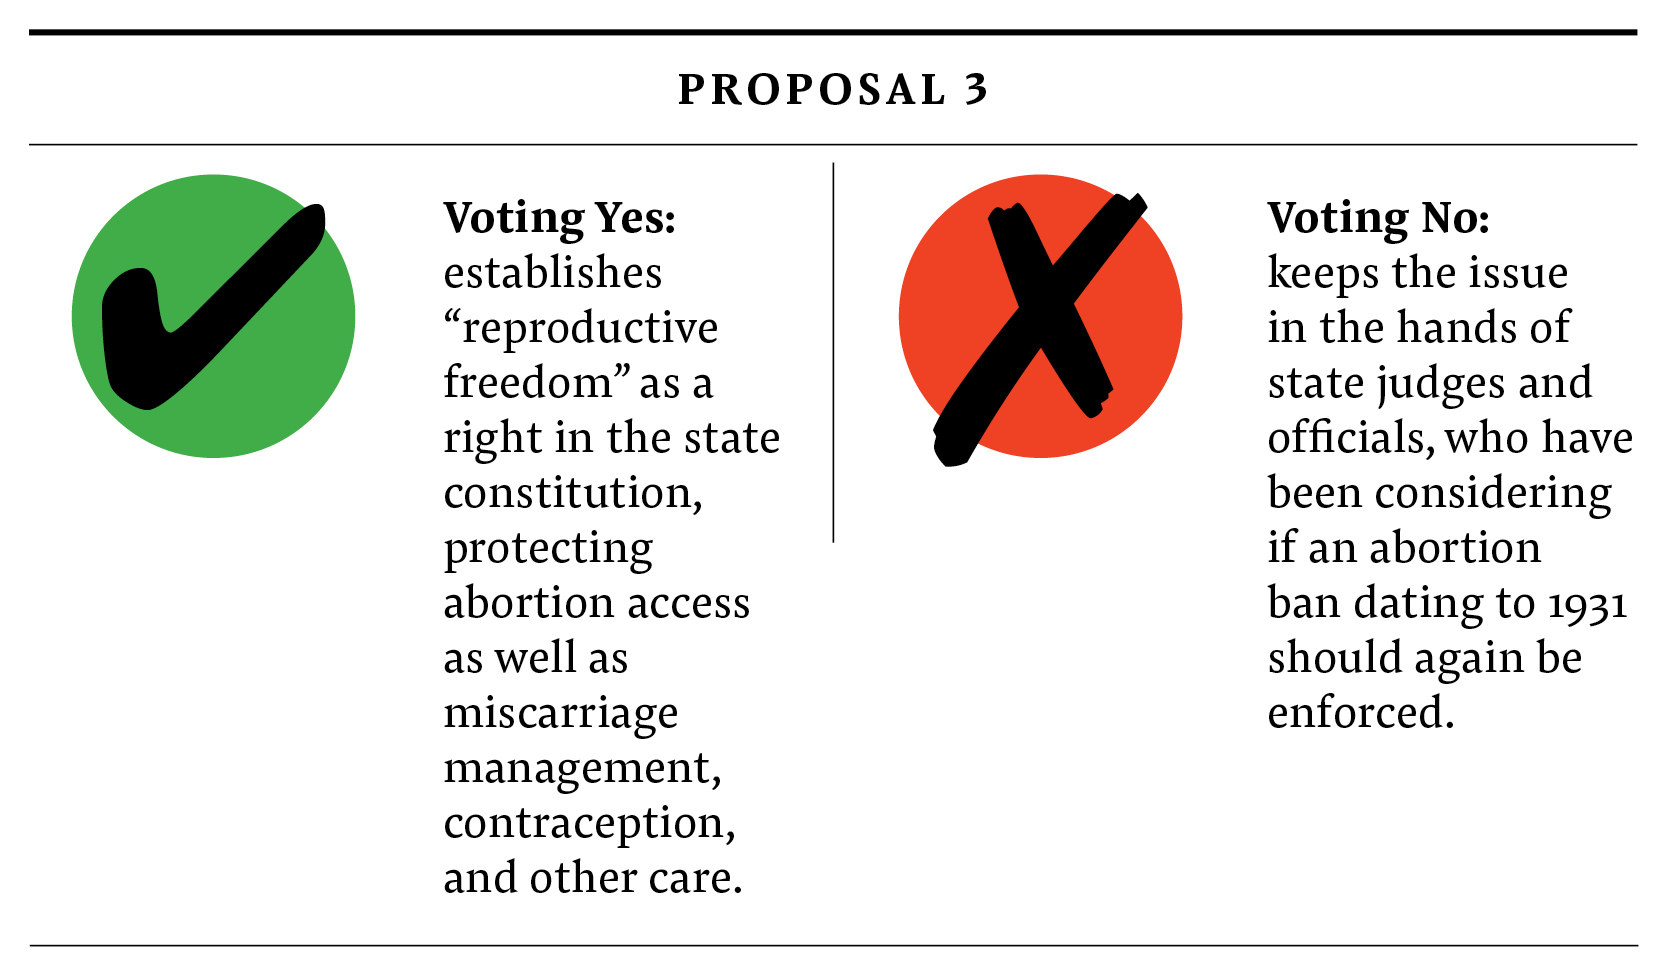 An infographic explaining Proposal 3. Yes: establishes &quot;reproductive freedom&quot; as a right in the state constitution. No: keeps issue in the hands of state judges and officials.